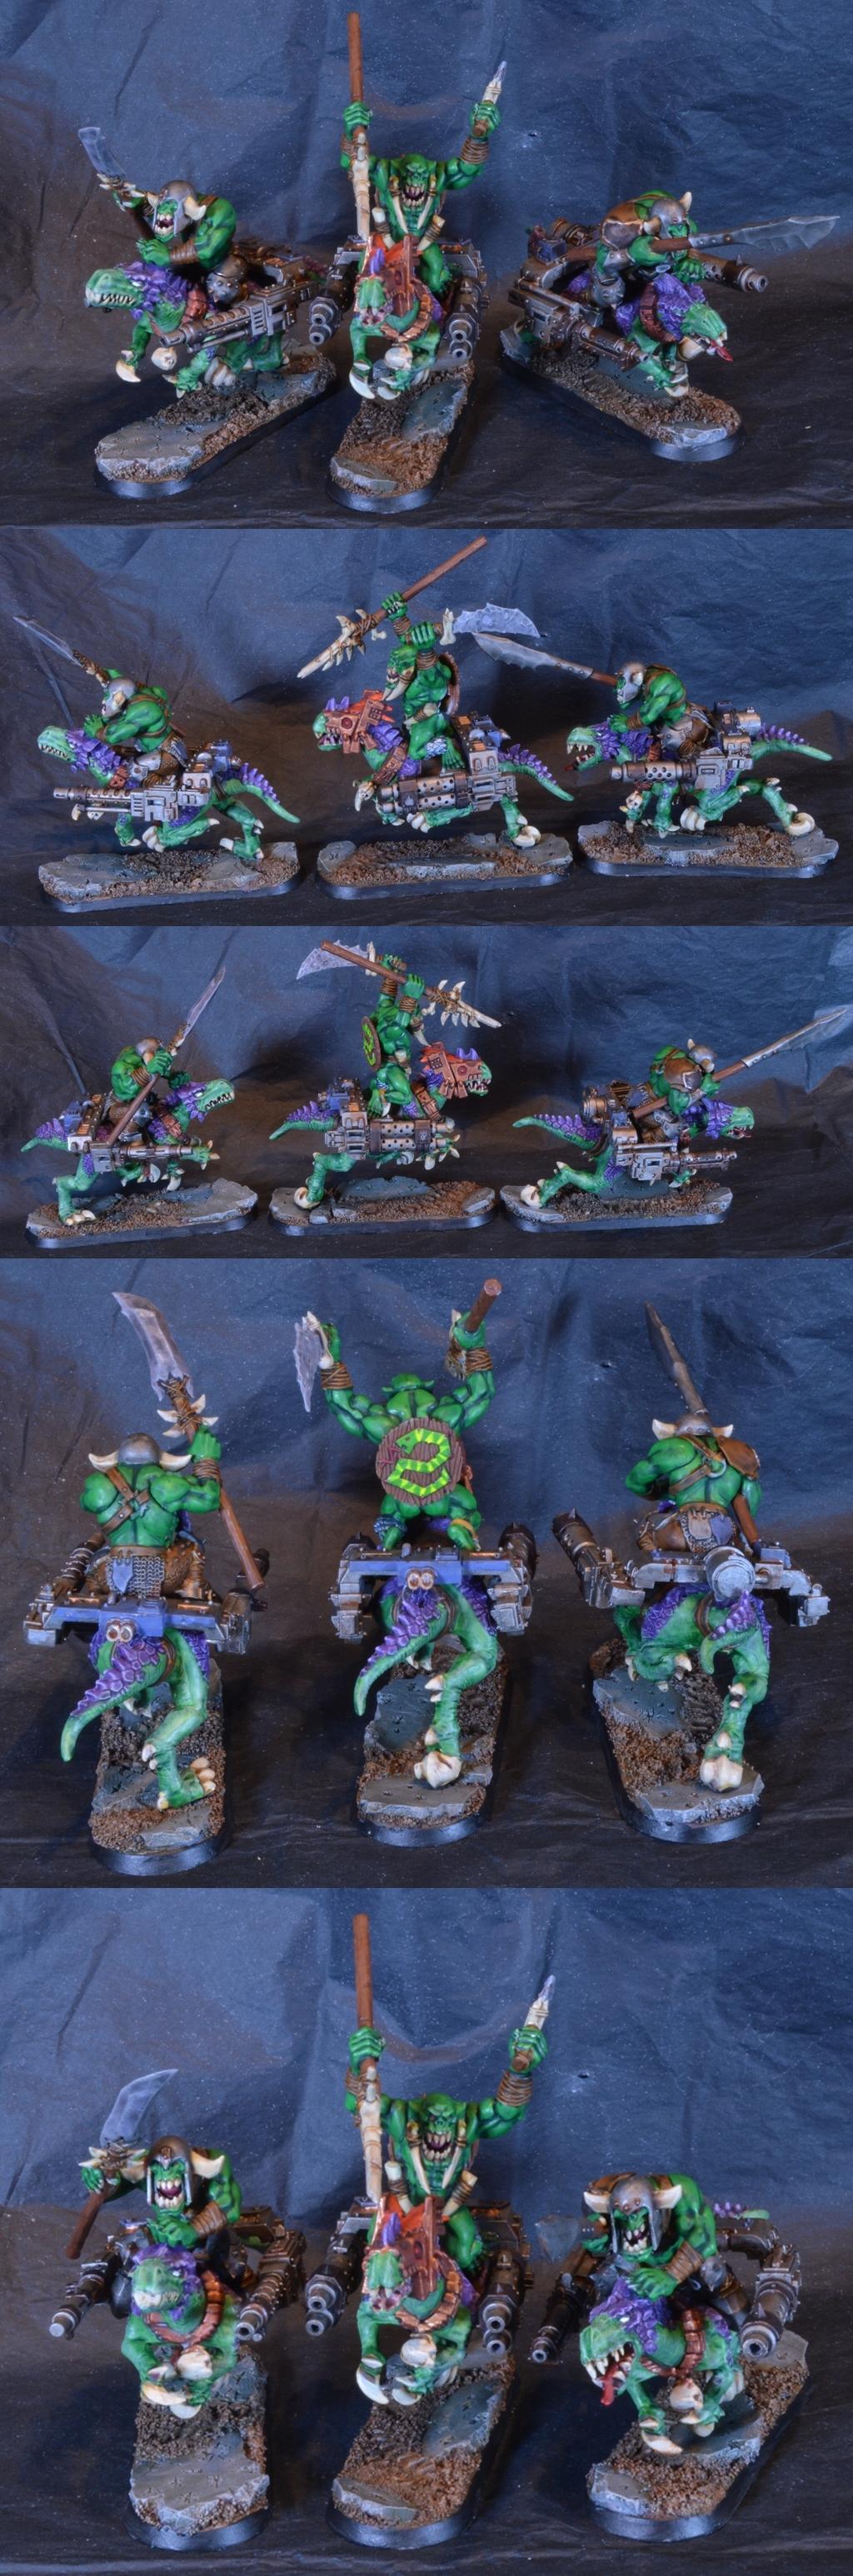 Cold One, Ork Cold One Riders, Orks, Savagae Ork, Snakebite